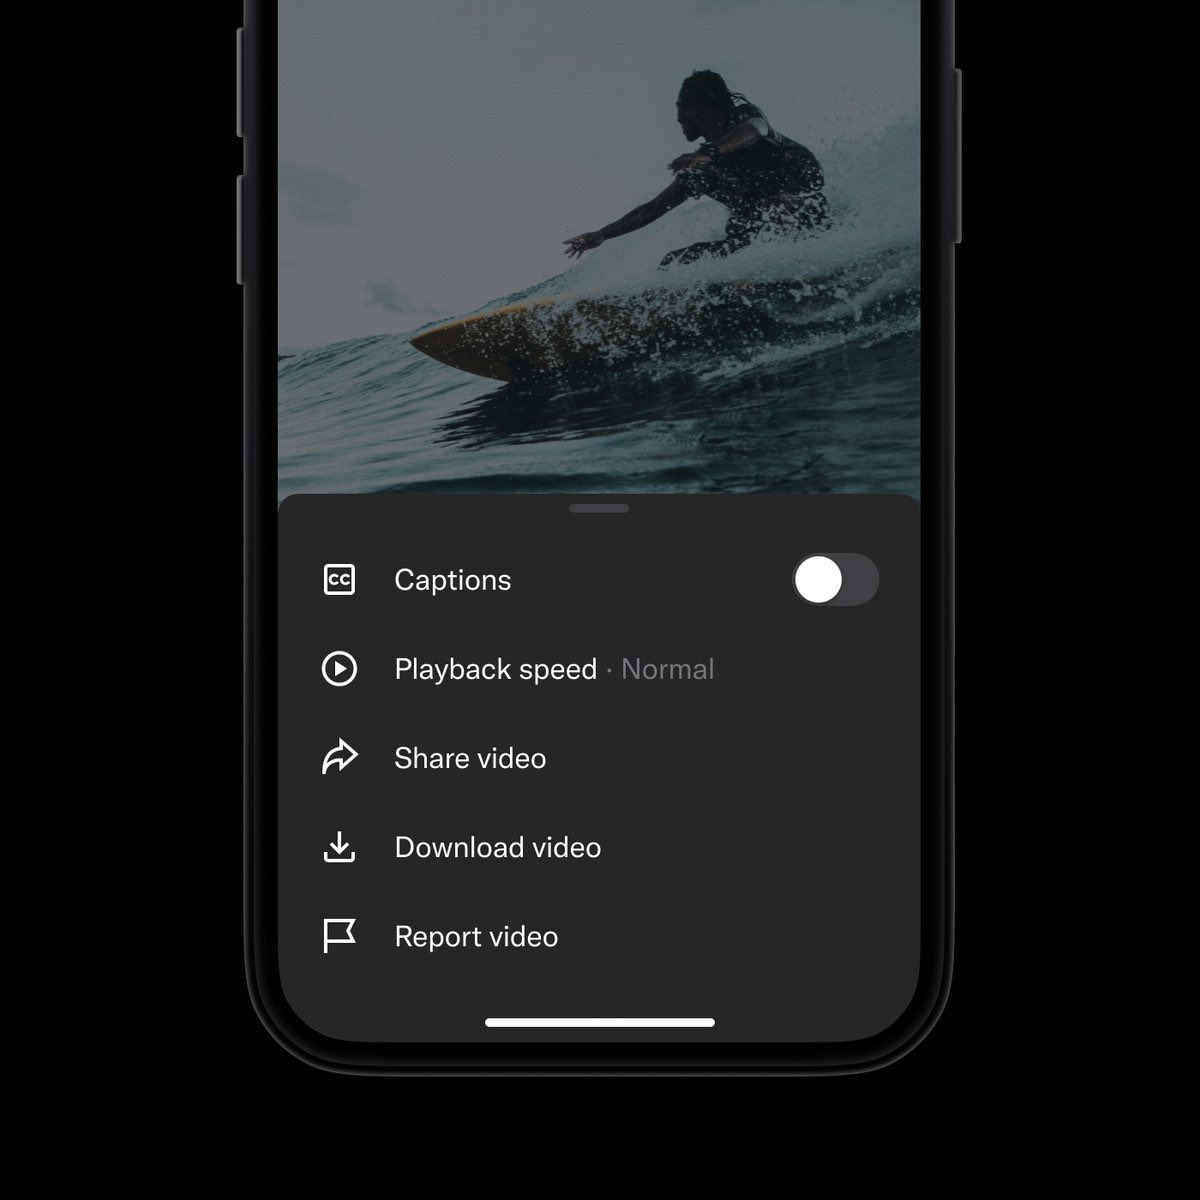 Twitter to introduce new video features, including a download option, captions, playback speed and more.